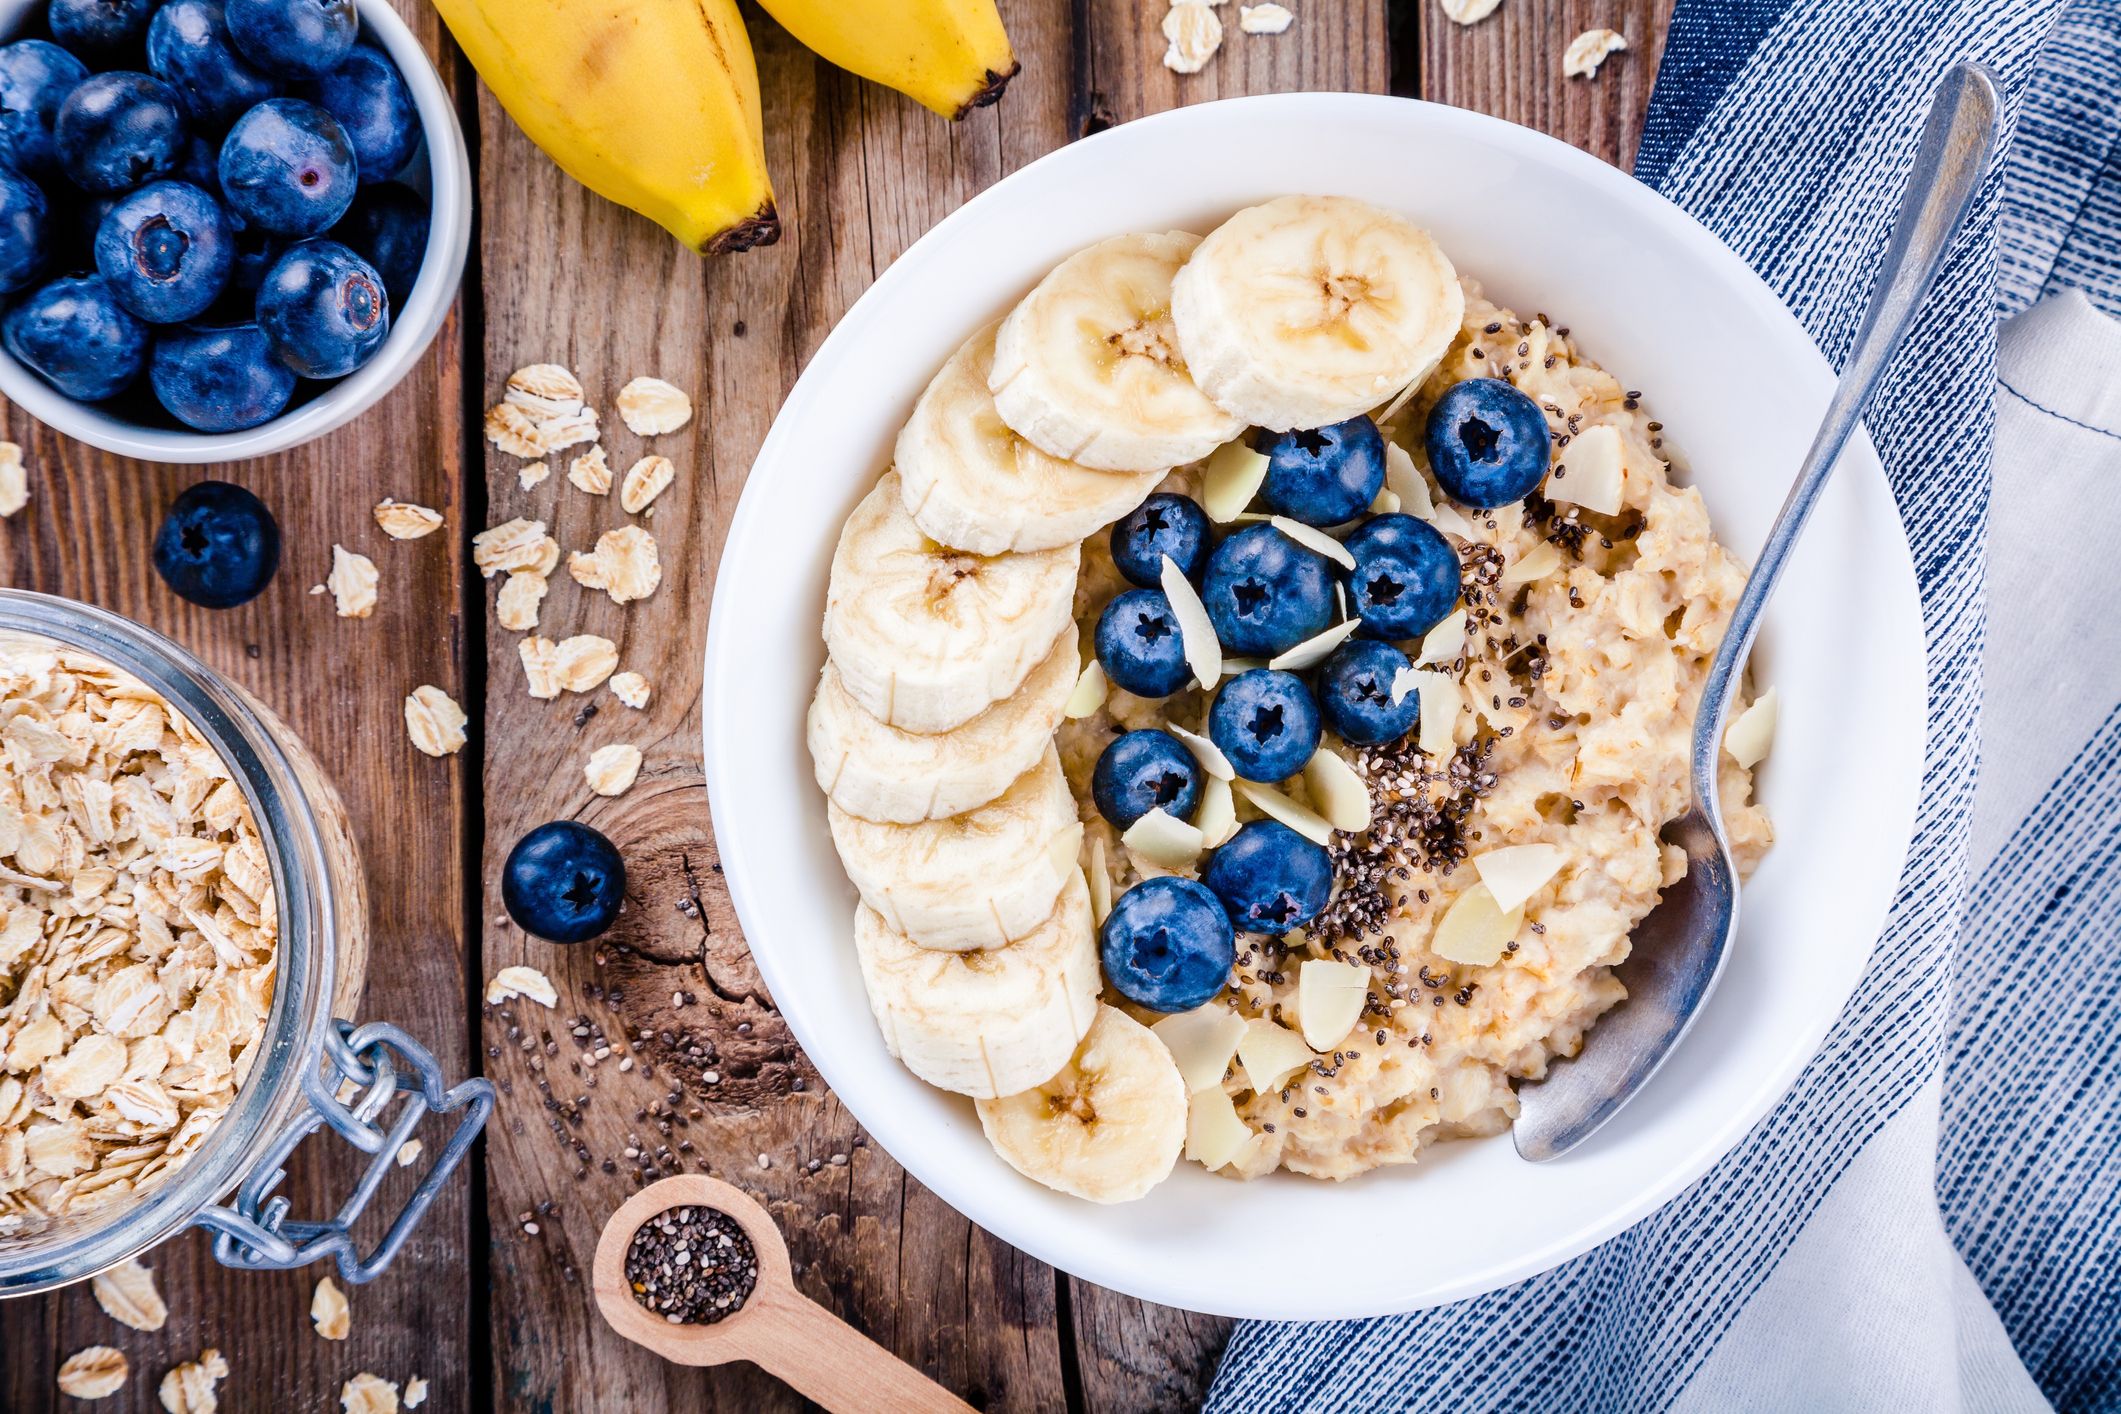 Is Oatmeal Healthy? - Oatmeal Nutrition And Benefits